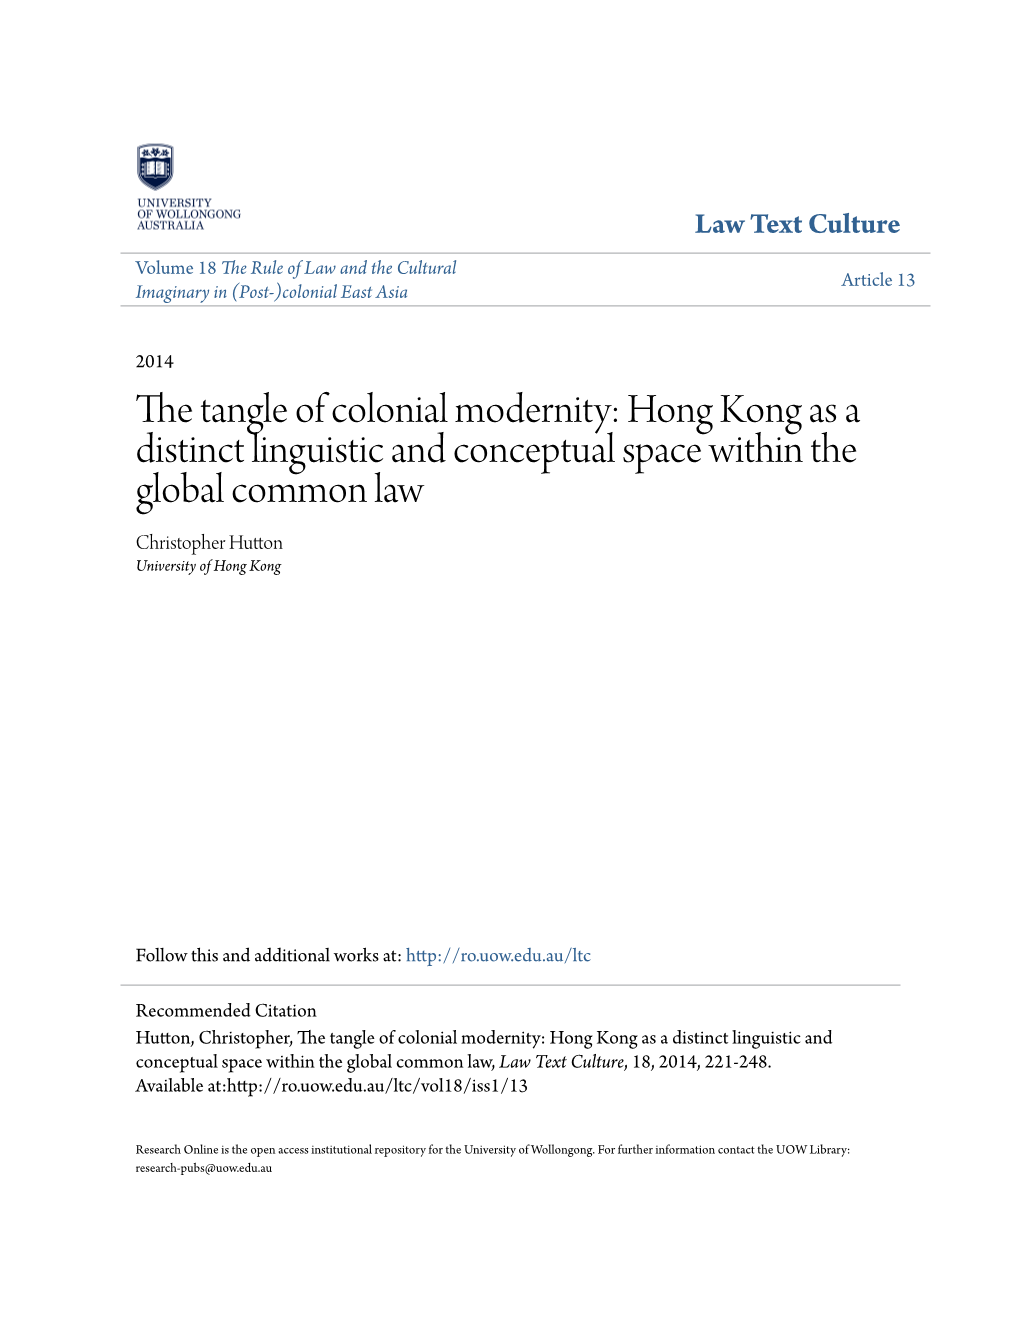 The Tangle of Colonial Modernity: Hong Kong As a Distinct Linguistic and Conceptual Space Within the Global Common Law